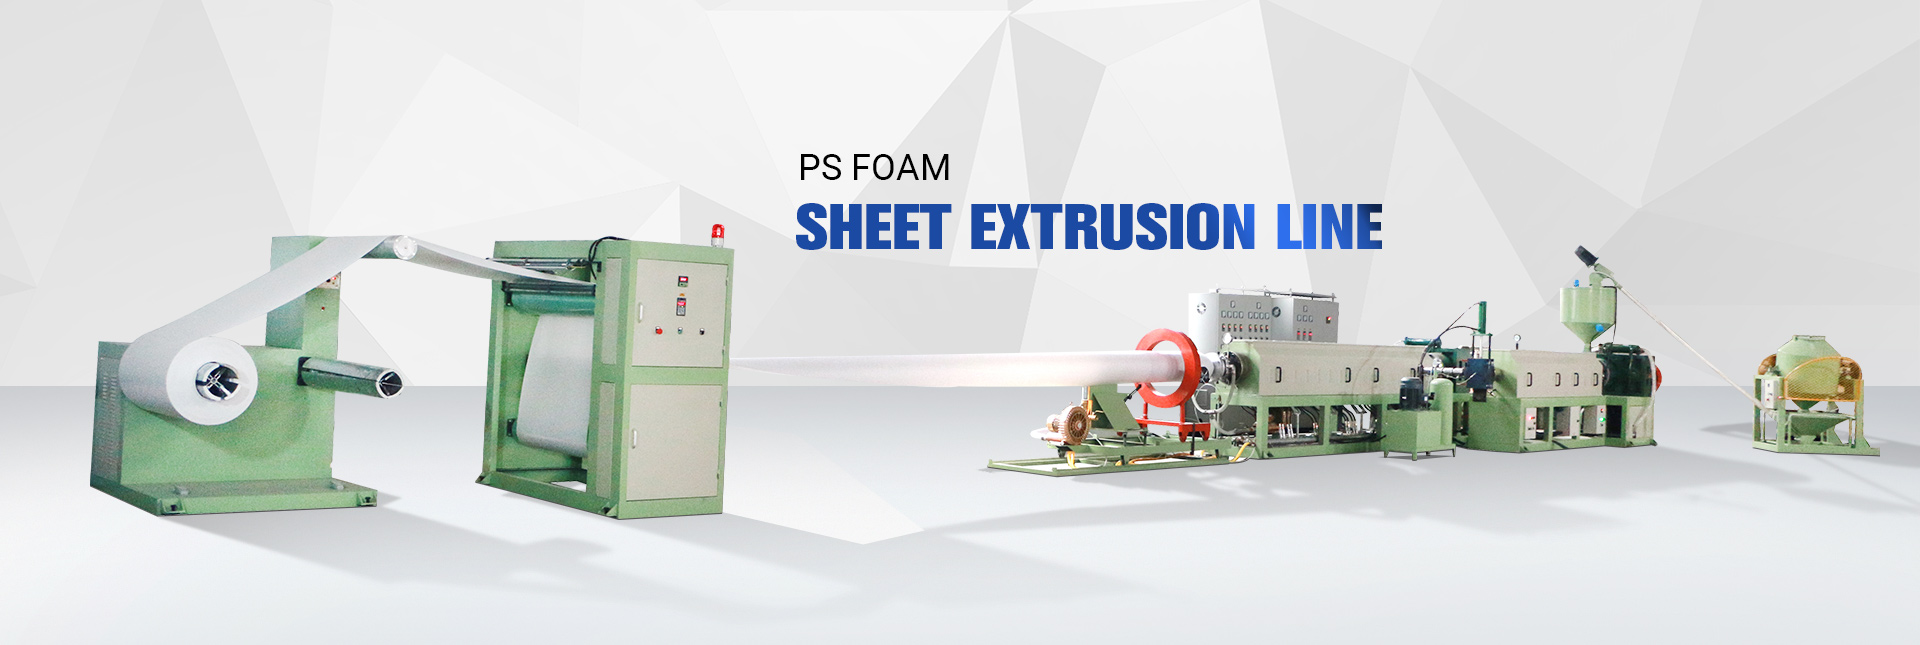 sheet-extrusion-line